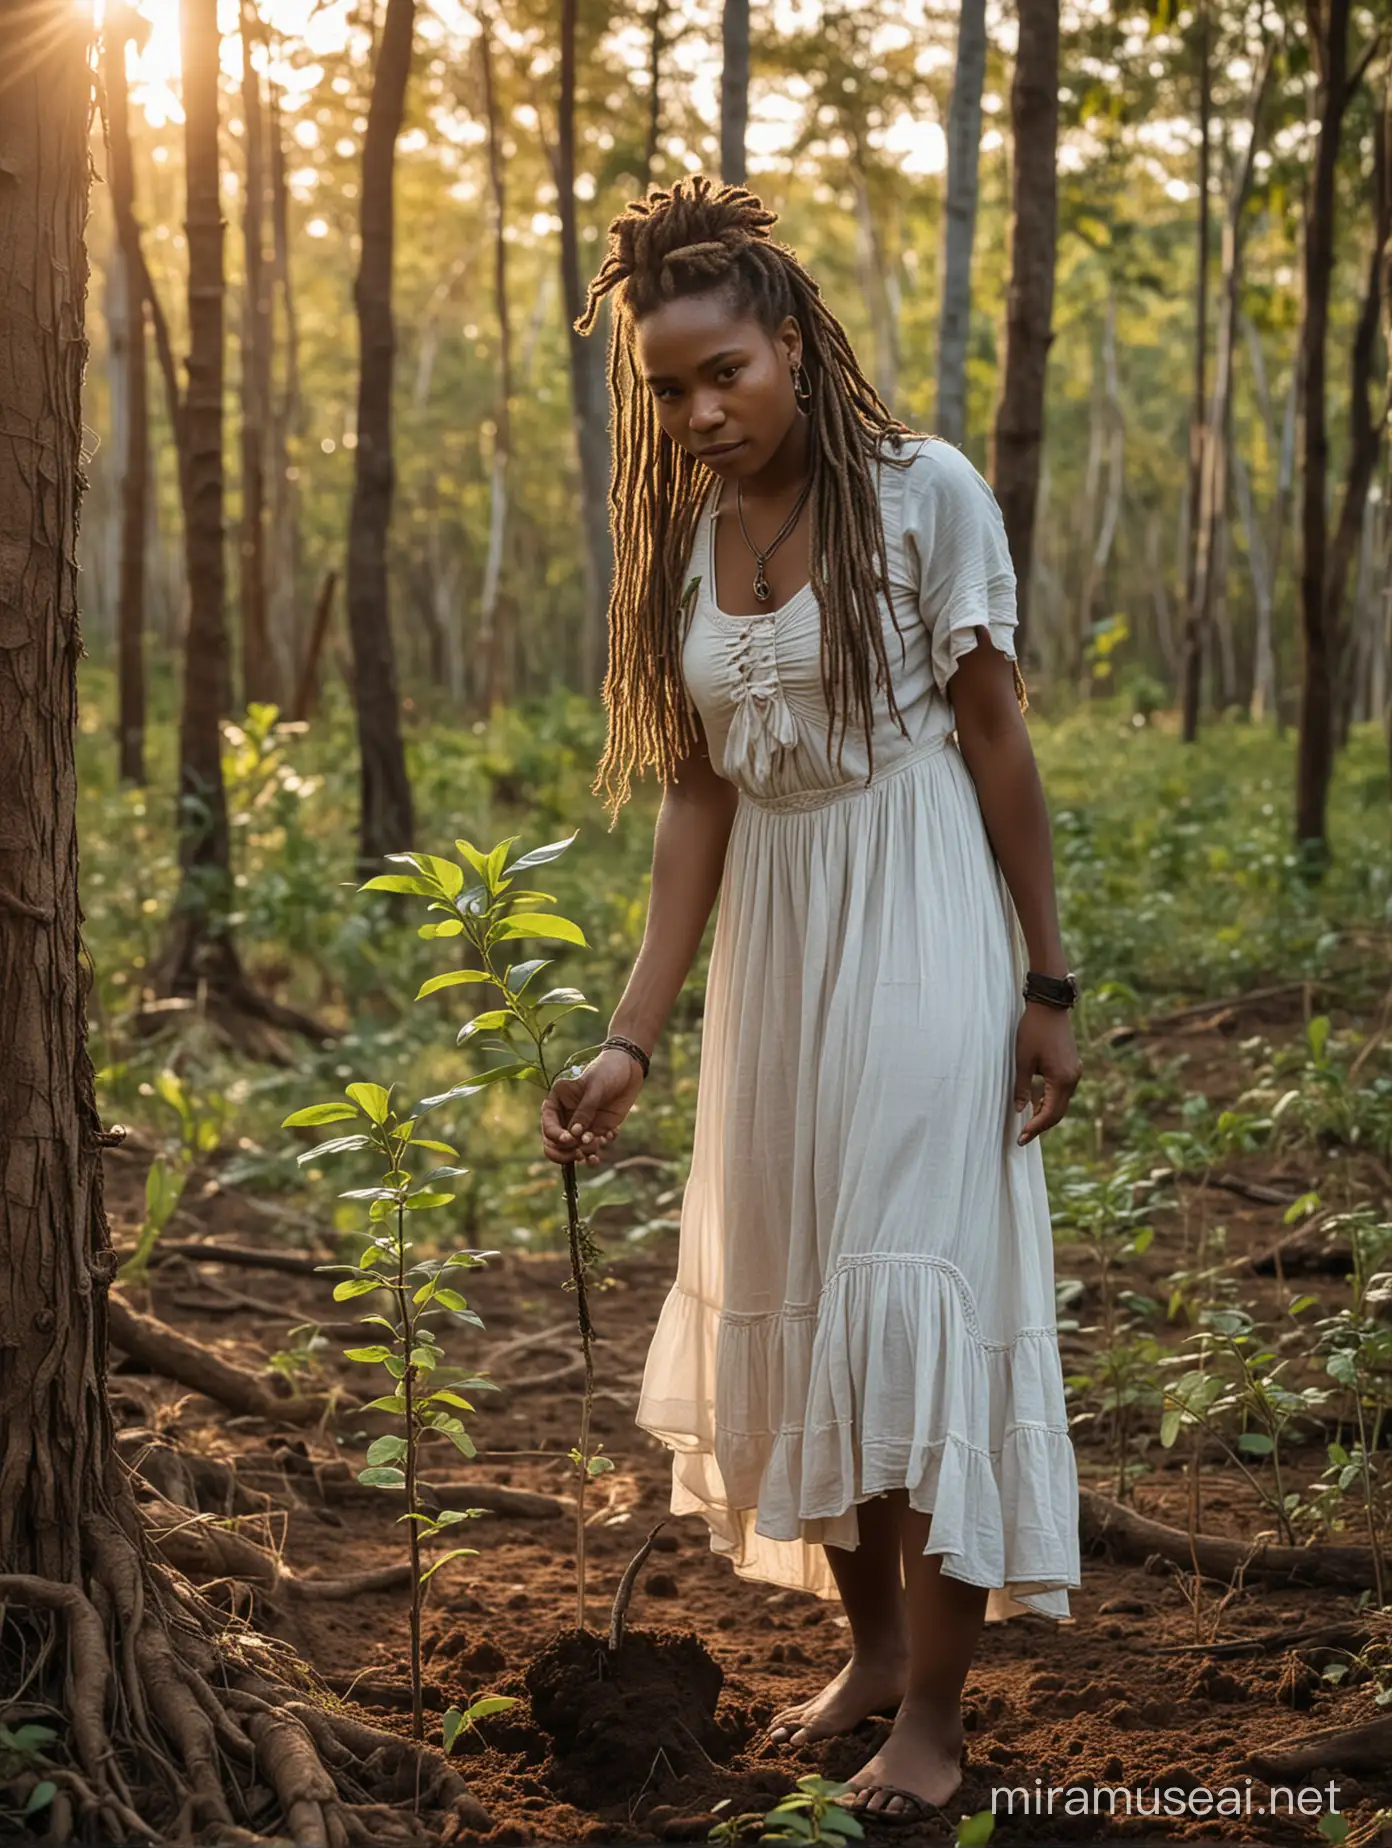 EcoConscious Woman Planting Trees in a Sunset Forest